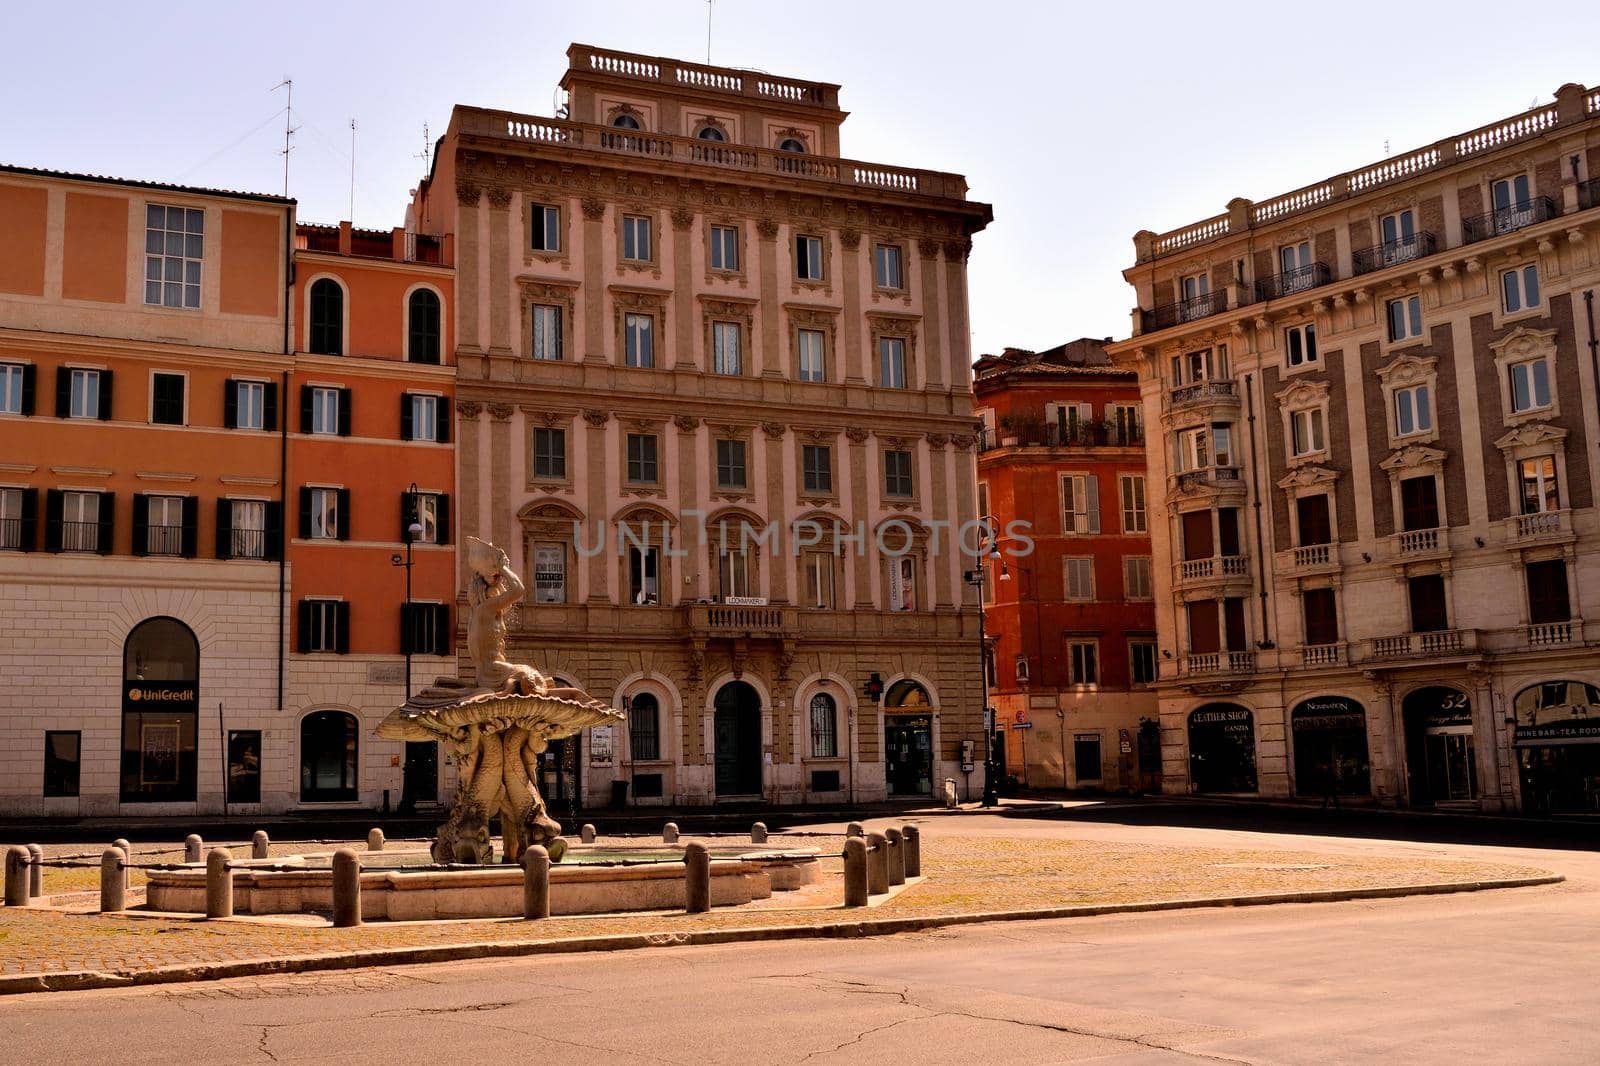 April 8th 2020, Rome, Italy: View of the Barberini Square without tourists due to the lockdown